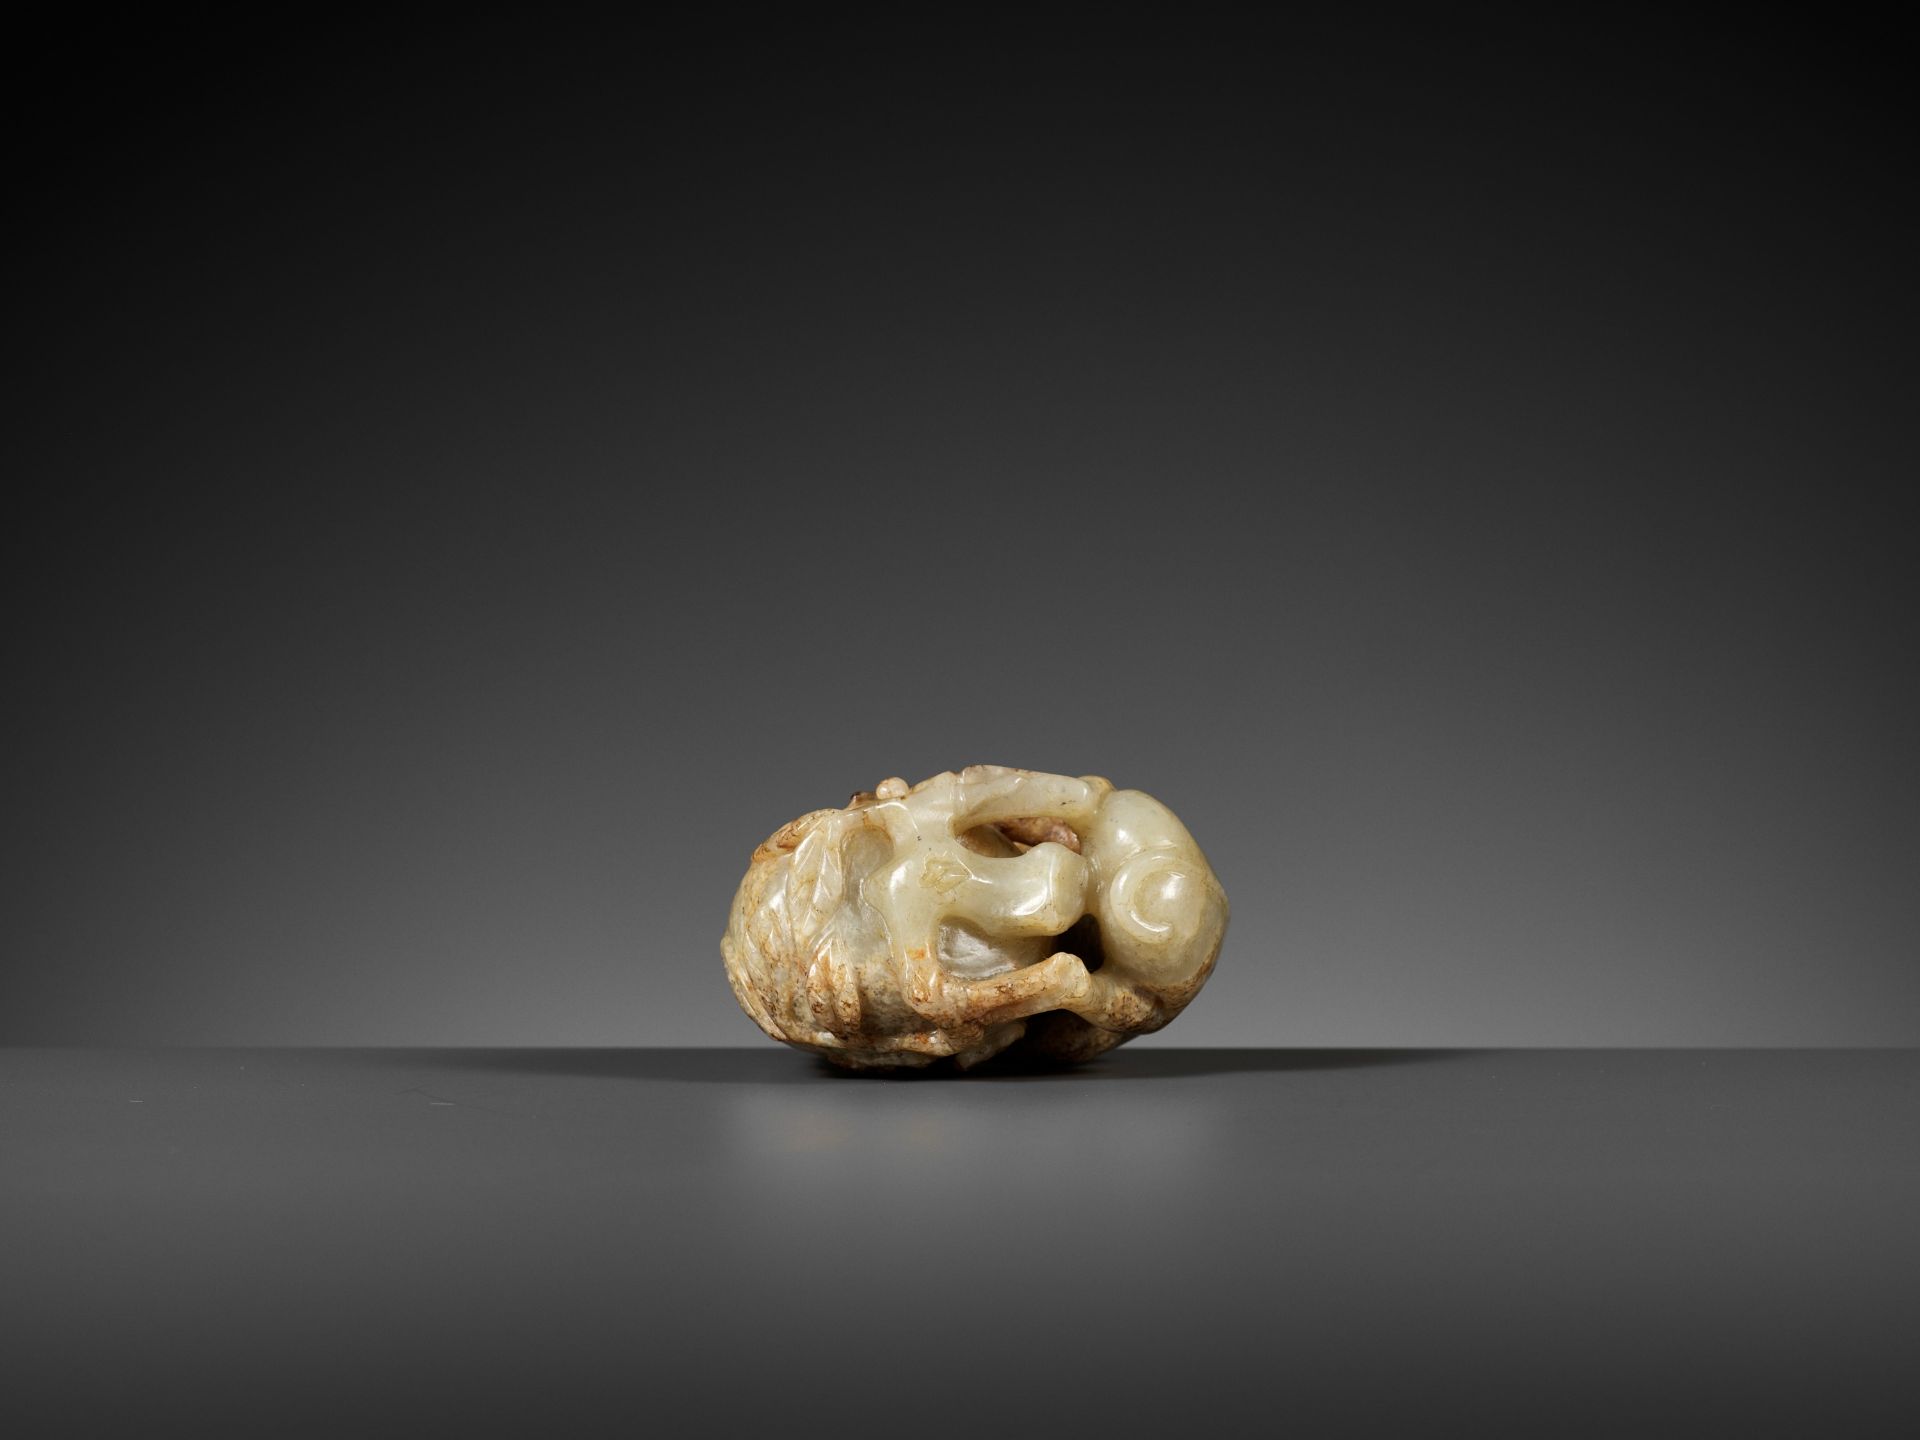 A MOTTLED PALE CELADON JADE 'MONKEY AND PEACH' FIGURE, 17TH - 18TH CENTURY - Image 10 of 10